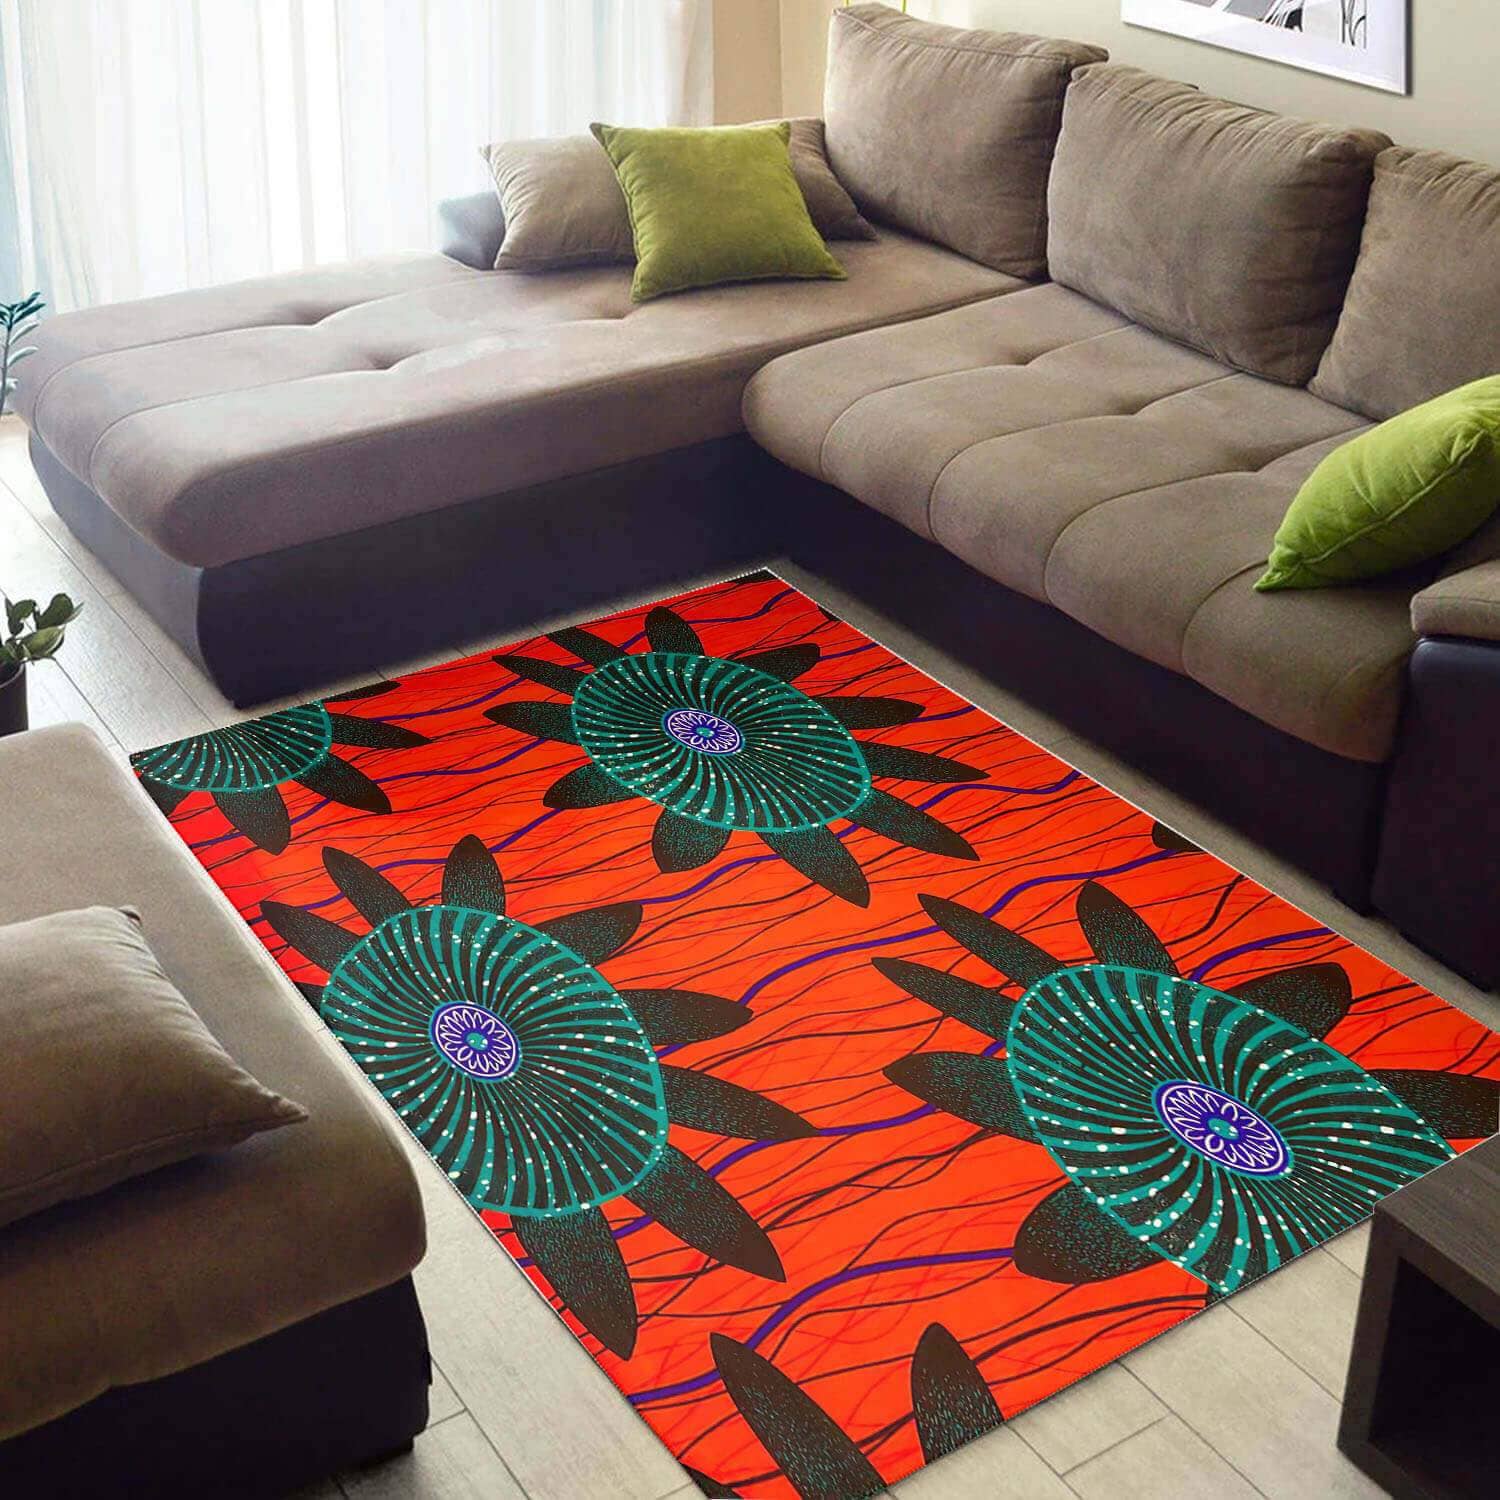 Cool African Style Trendy Themed Afrocentric Pattern Art Design Floor Carpet Home Rug